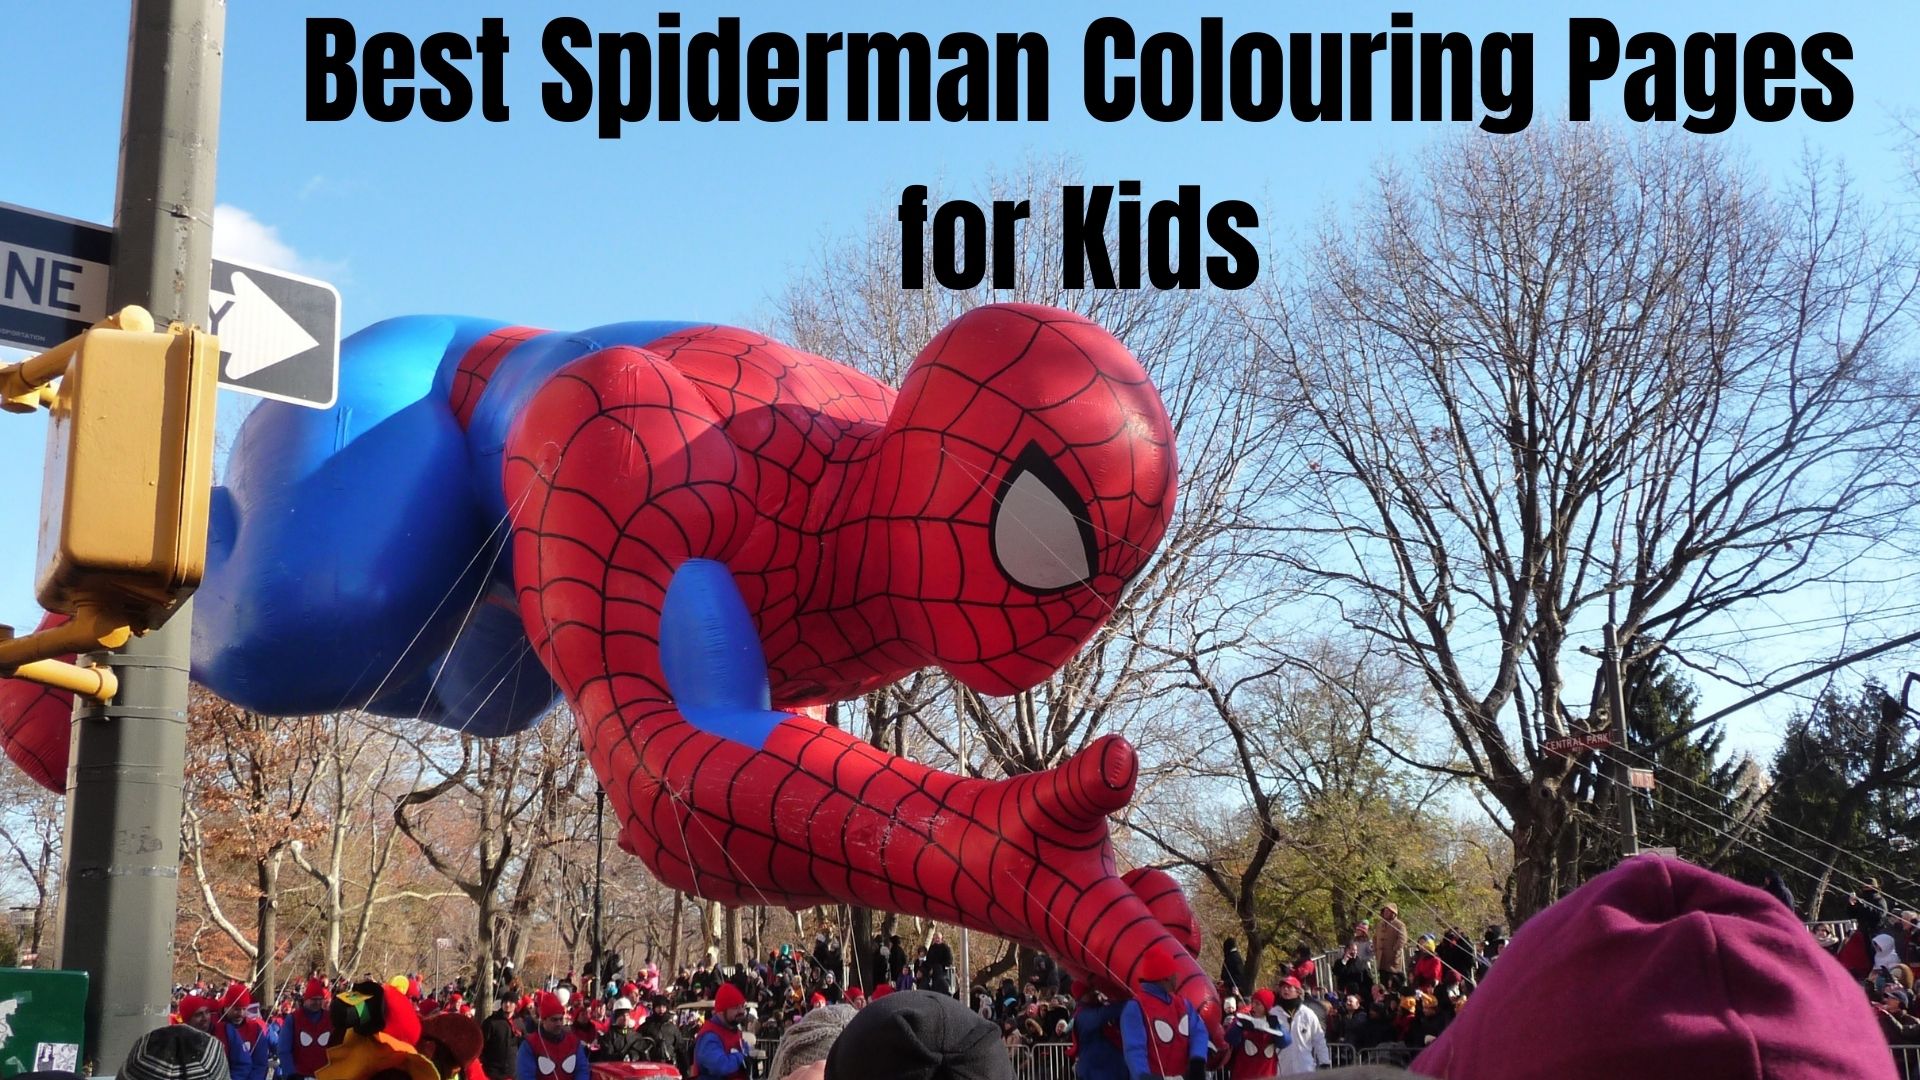 Best Spiderman Colouring Pages for Kids